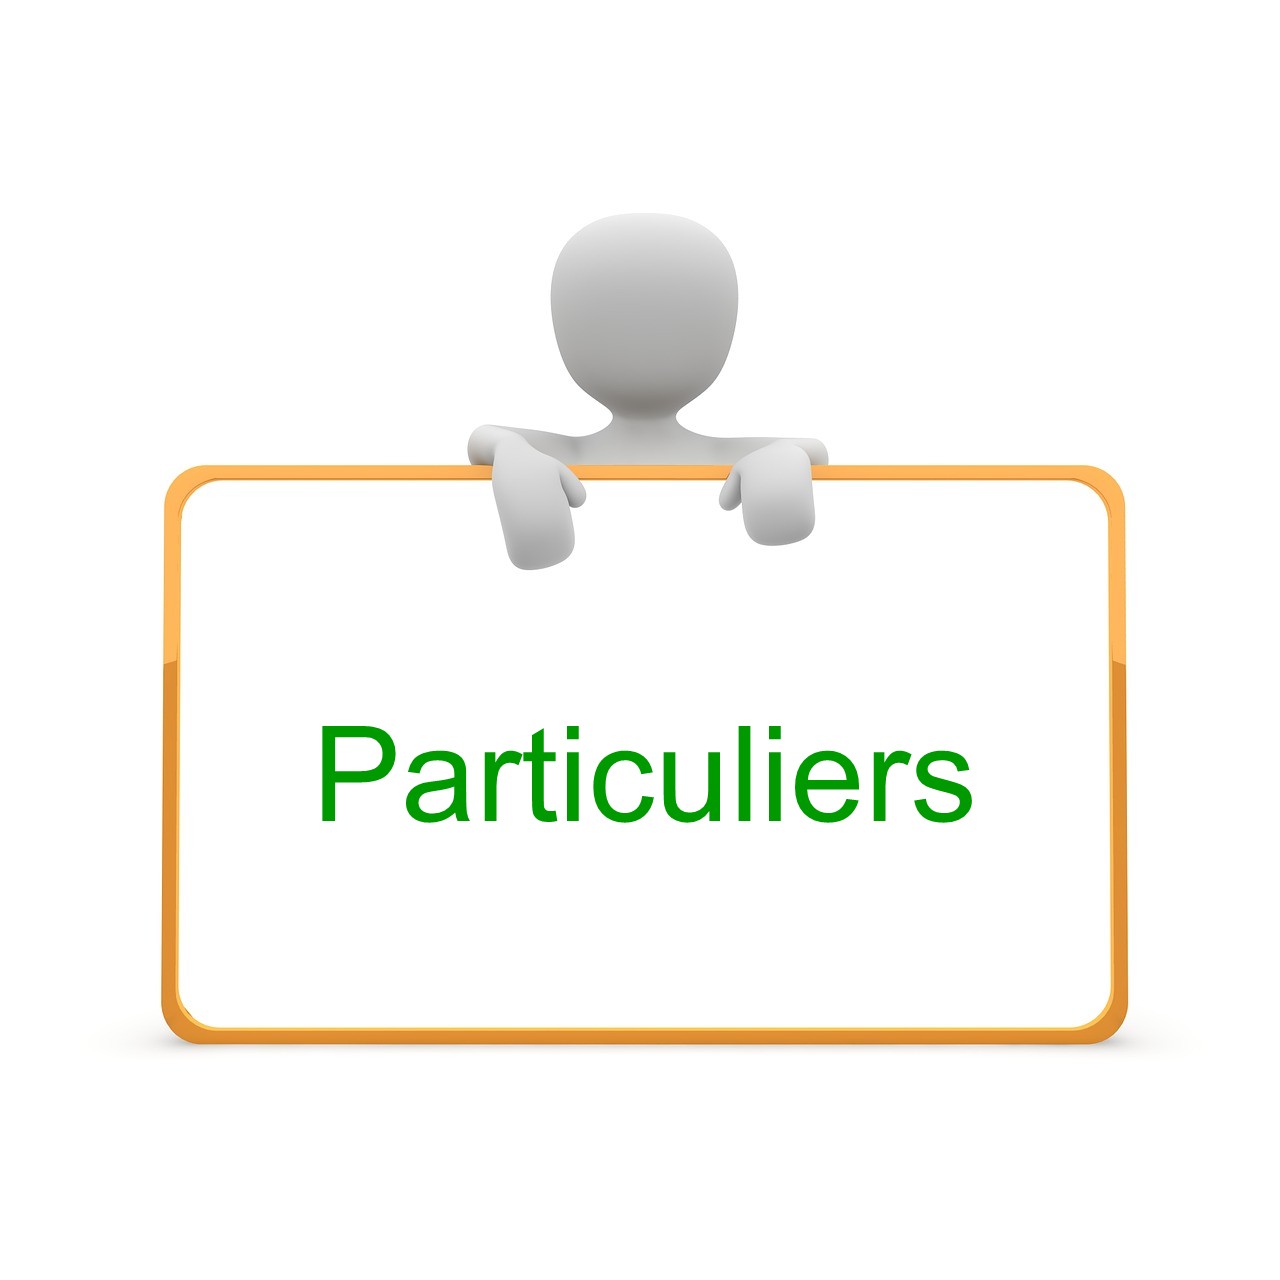 Business particuliers